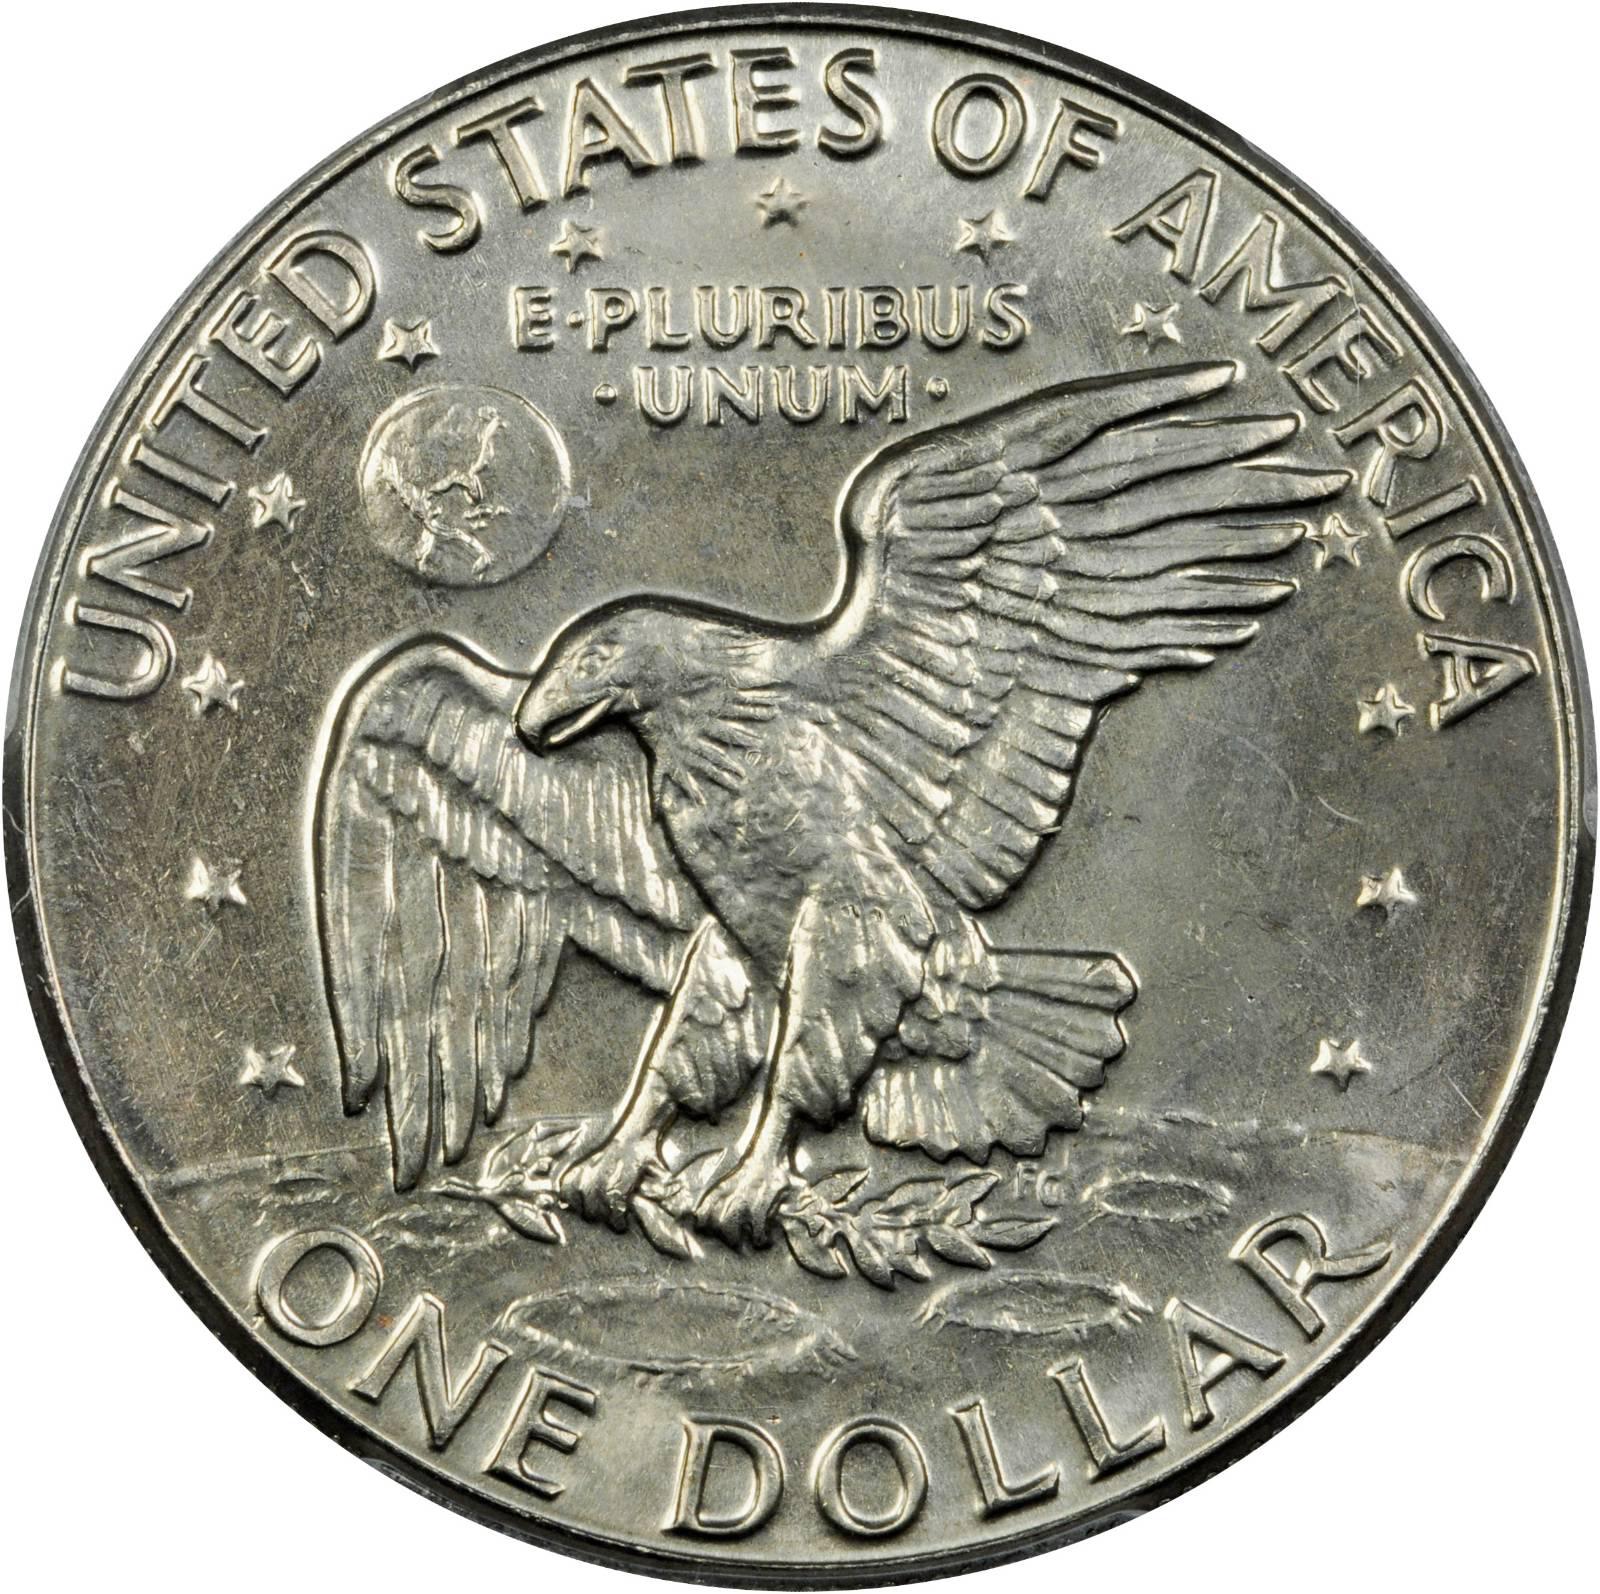 Value Of 1977 D Eisenhower Dollar Sell Modern Coins,How To Make A Mojito Easy